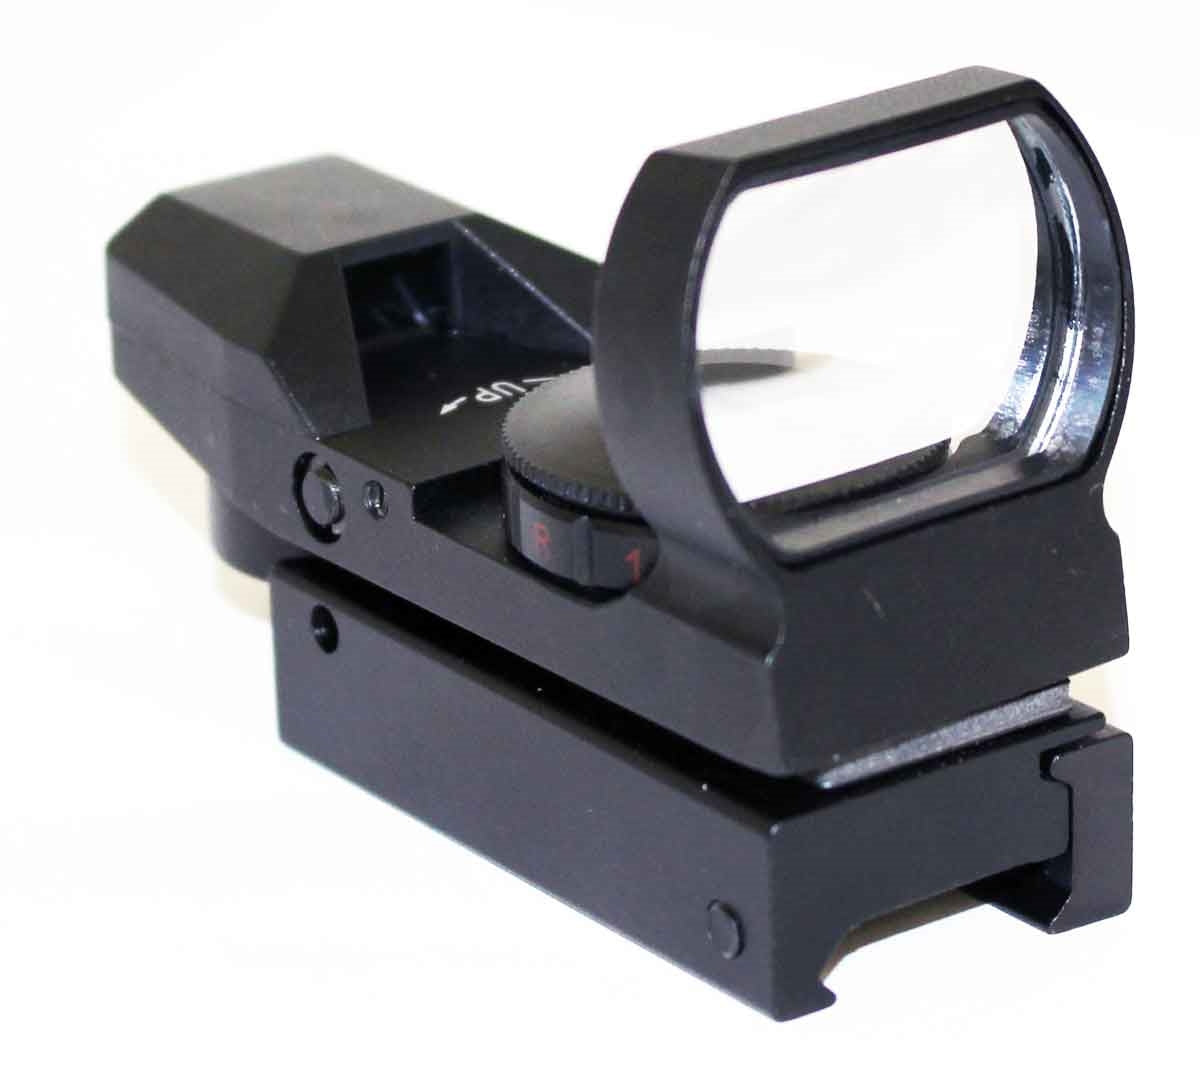 Tactical Reflex Sight With 4 Reticles With Base Mount Compatible With Marlin 336 Rifle.